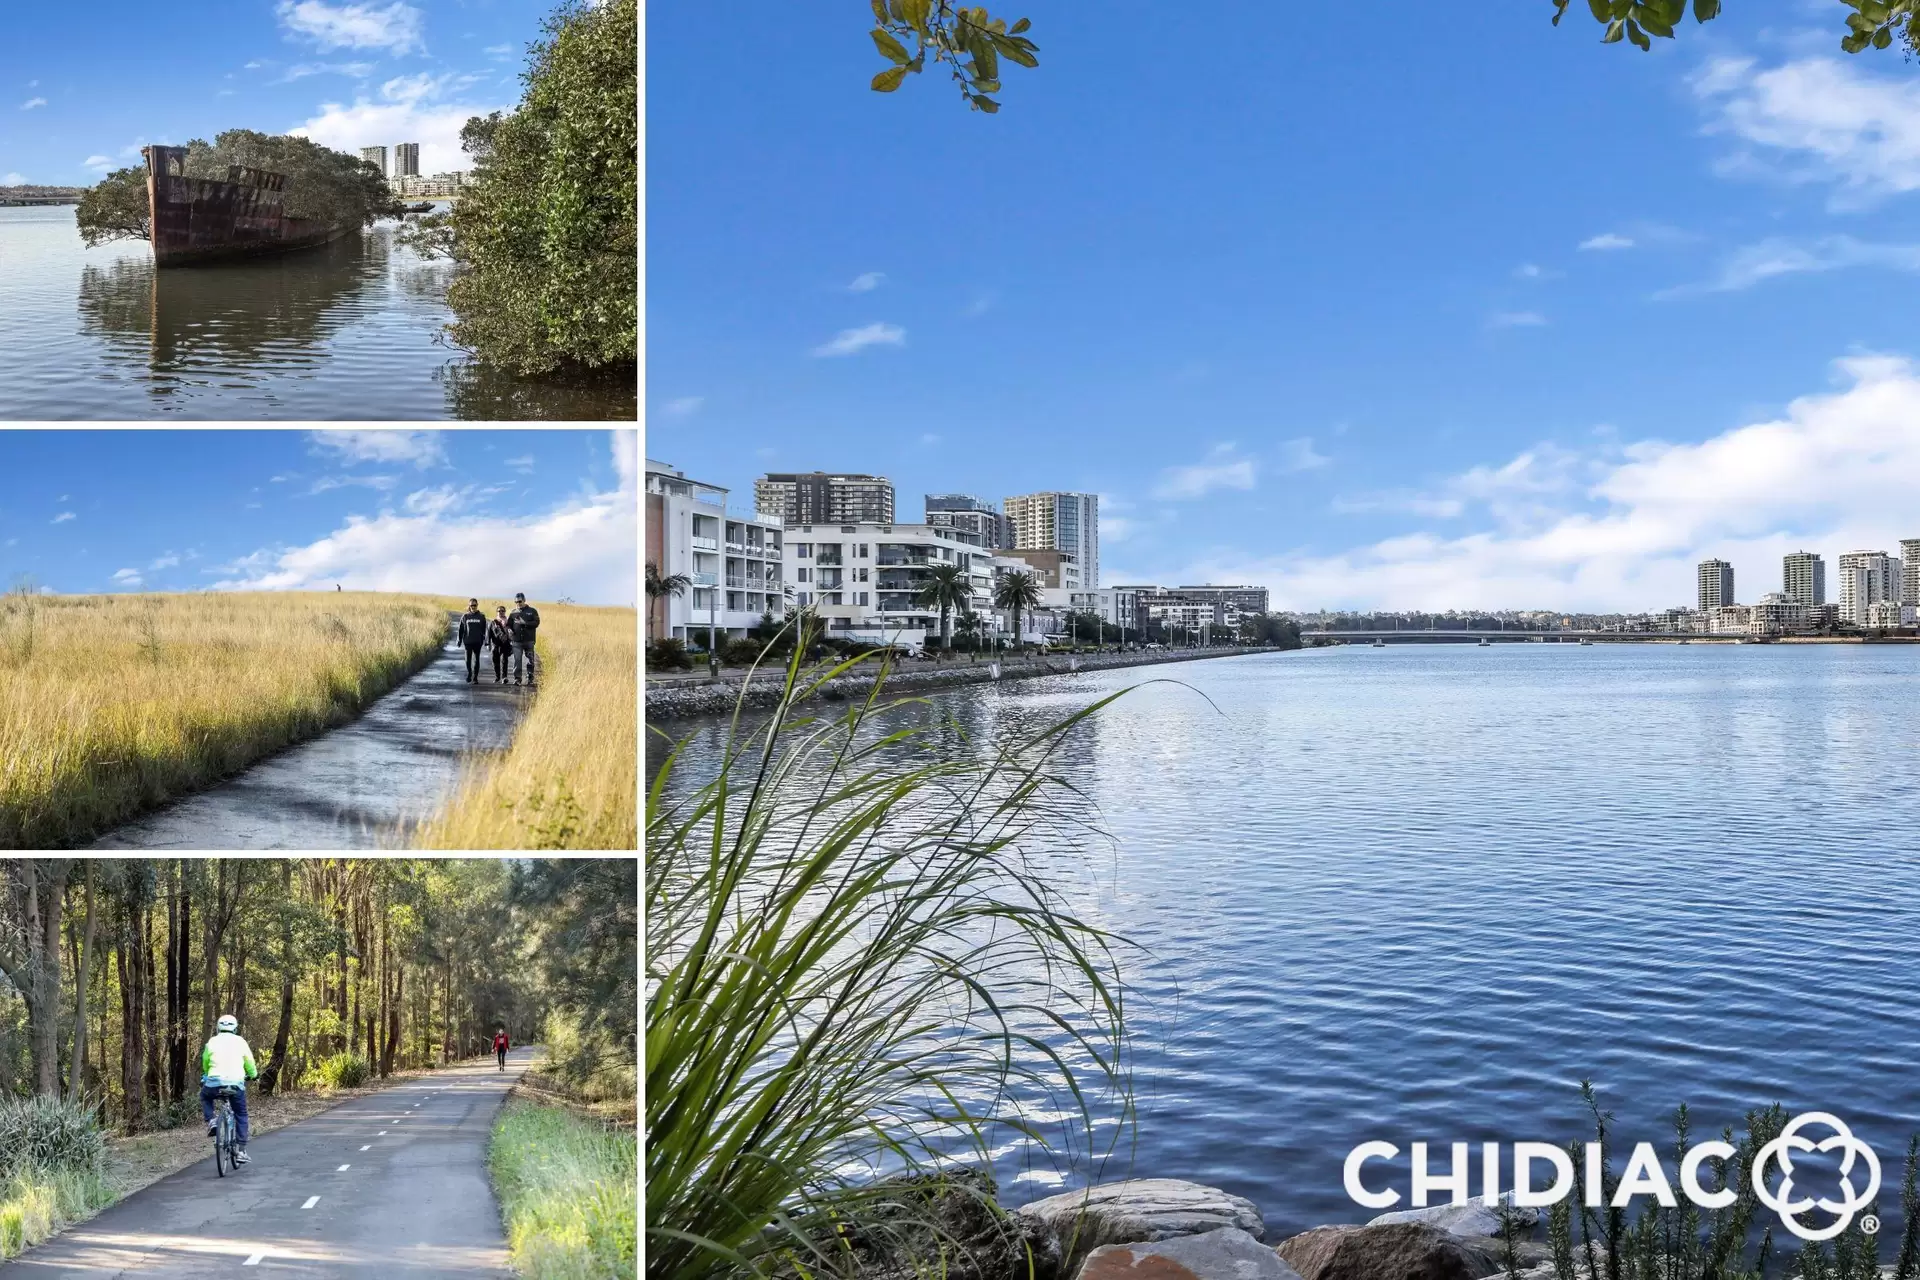 715/16 Baywater Drive, Wentworth Point Leased by Chidiac Realty - image 1